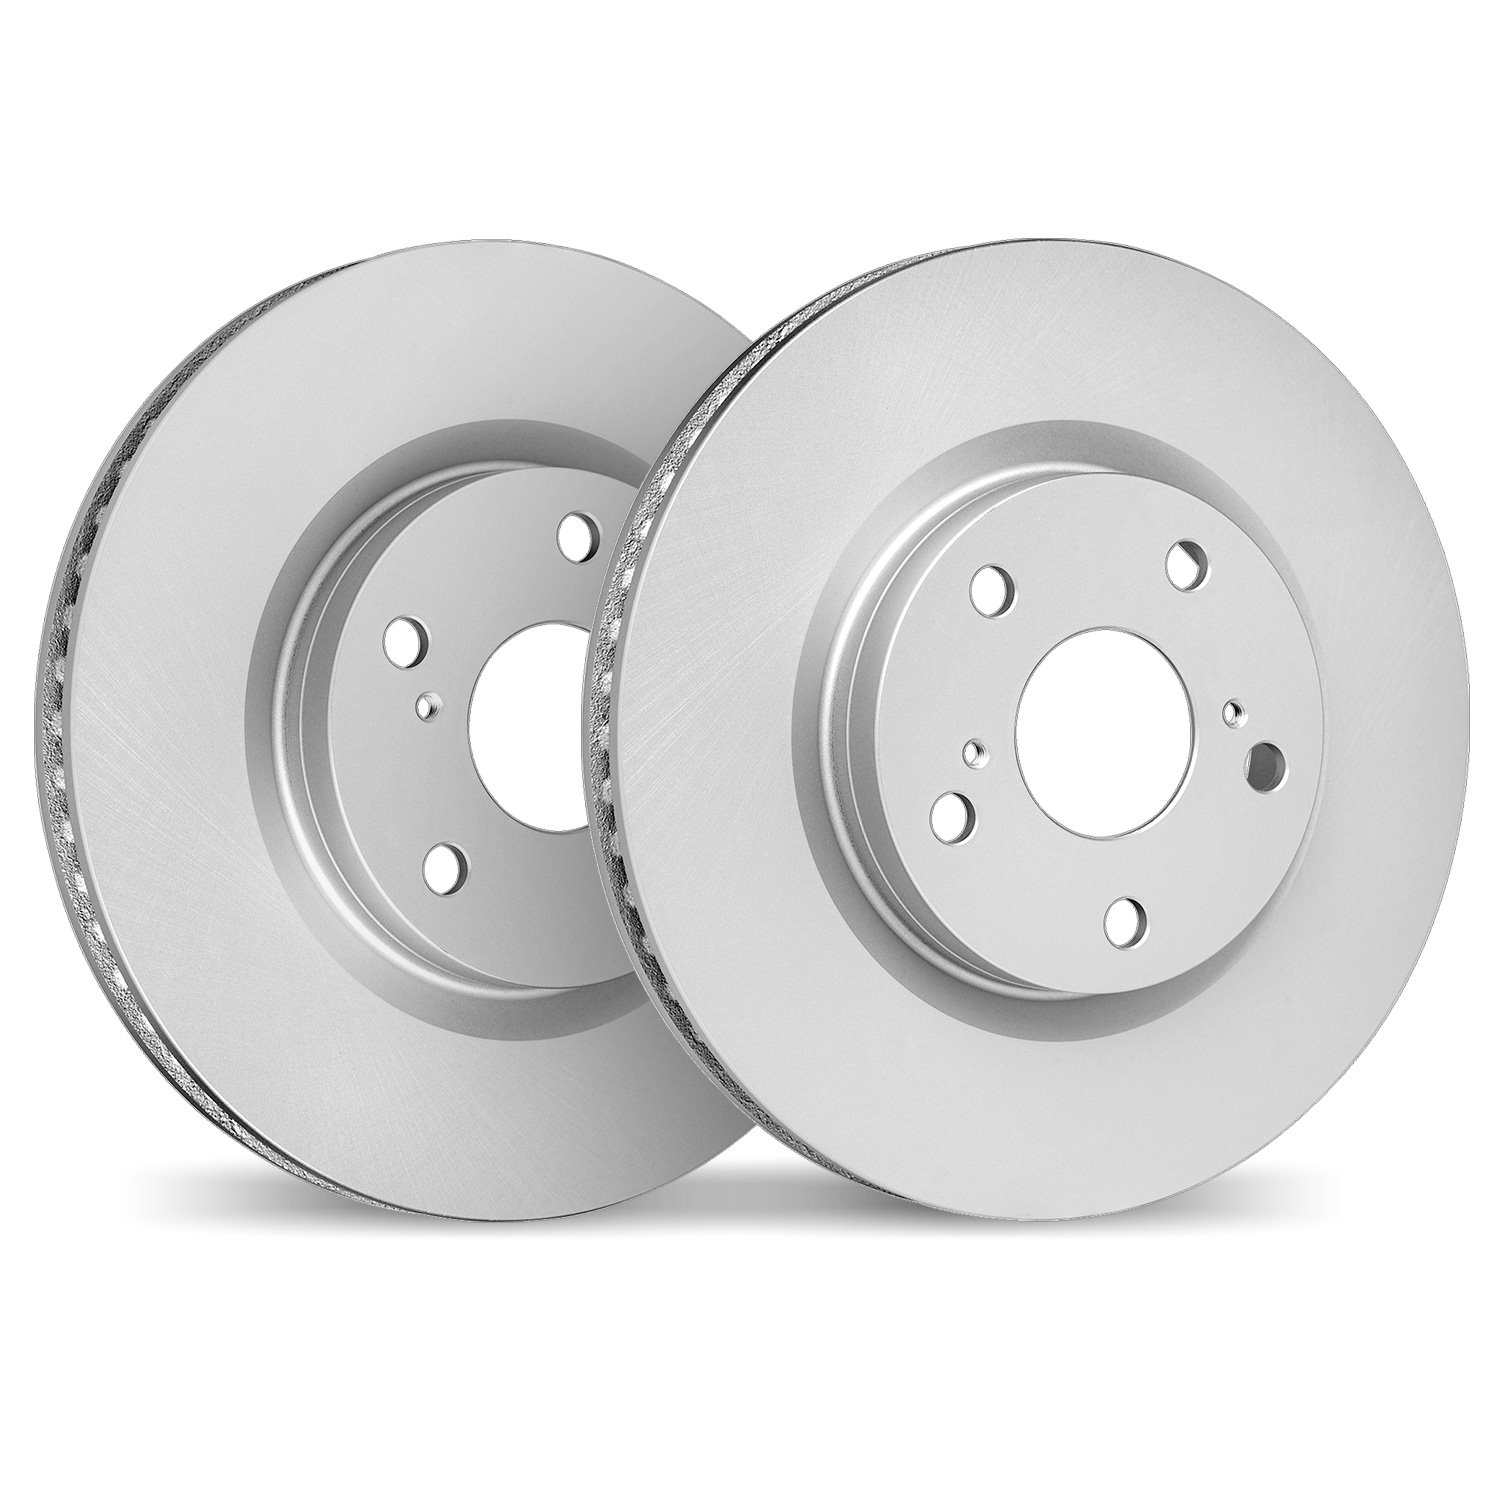 4002-54168 Geospec Brake Rotors, Fits Select Ford/Lincoln/Mercury/Mazda, Position: Front